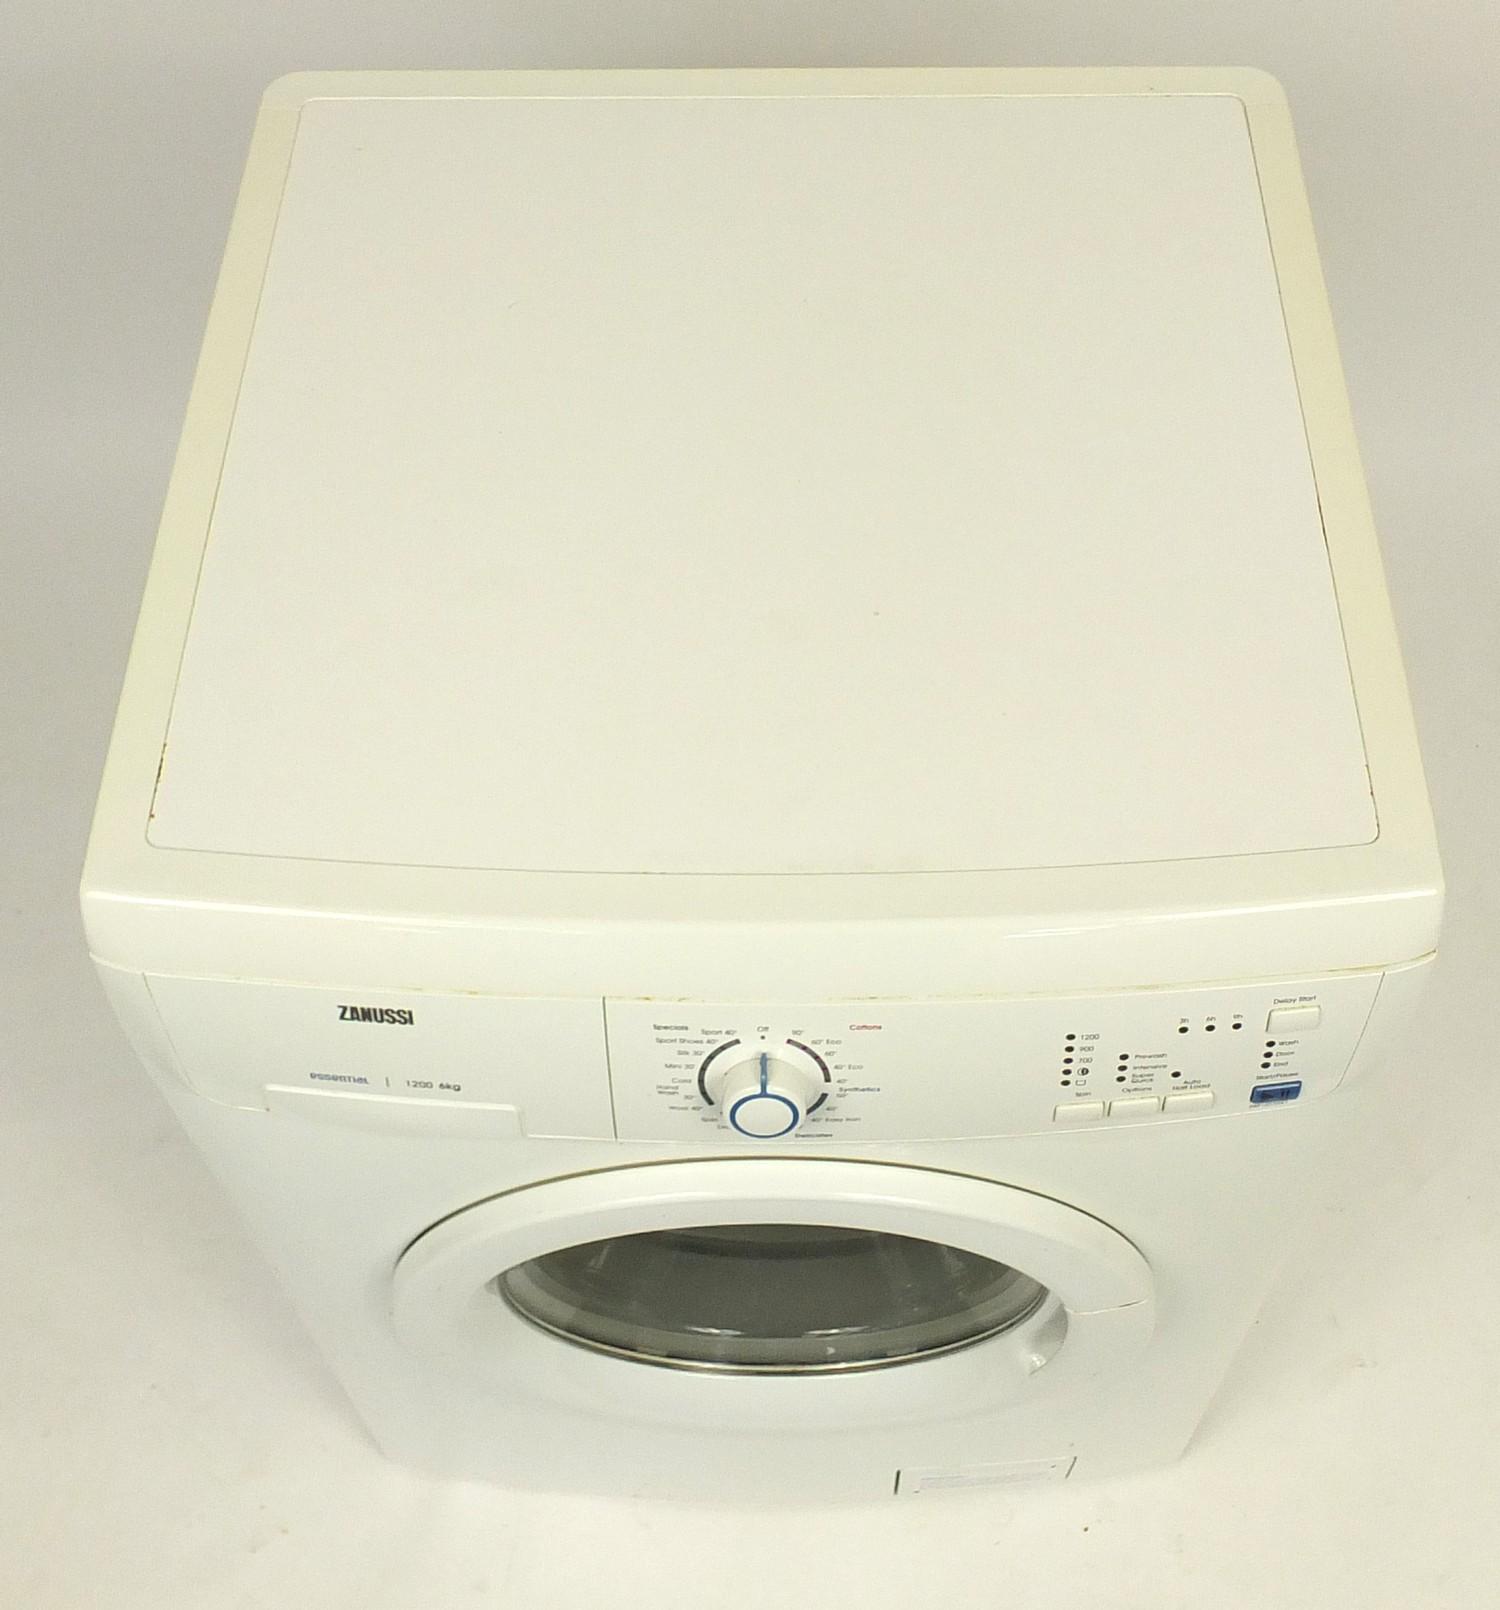 Zanussi Essential 1200 6kg washing machine : For Further Condition Reports Please Visit Our Website, - Image 3 of 4